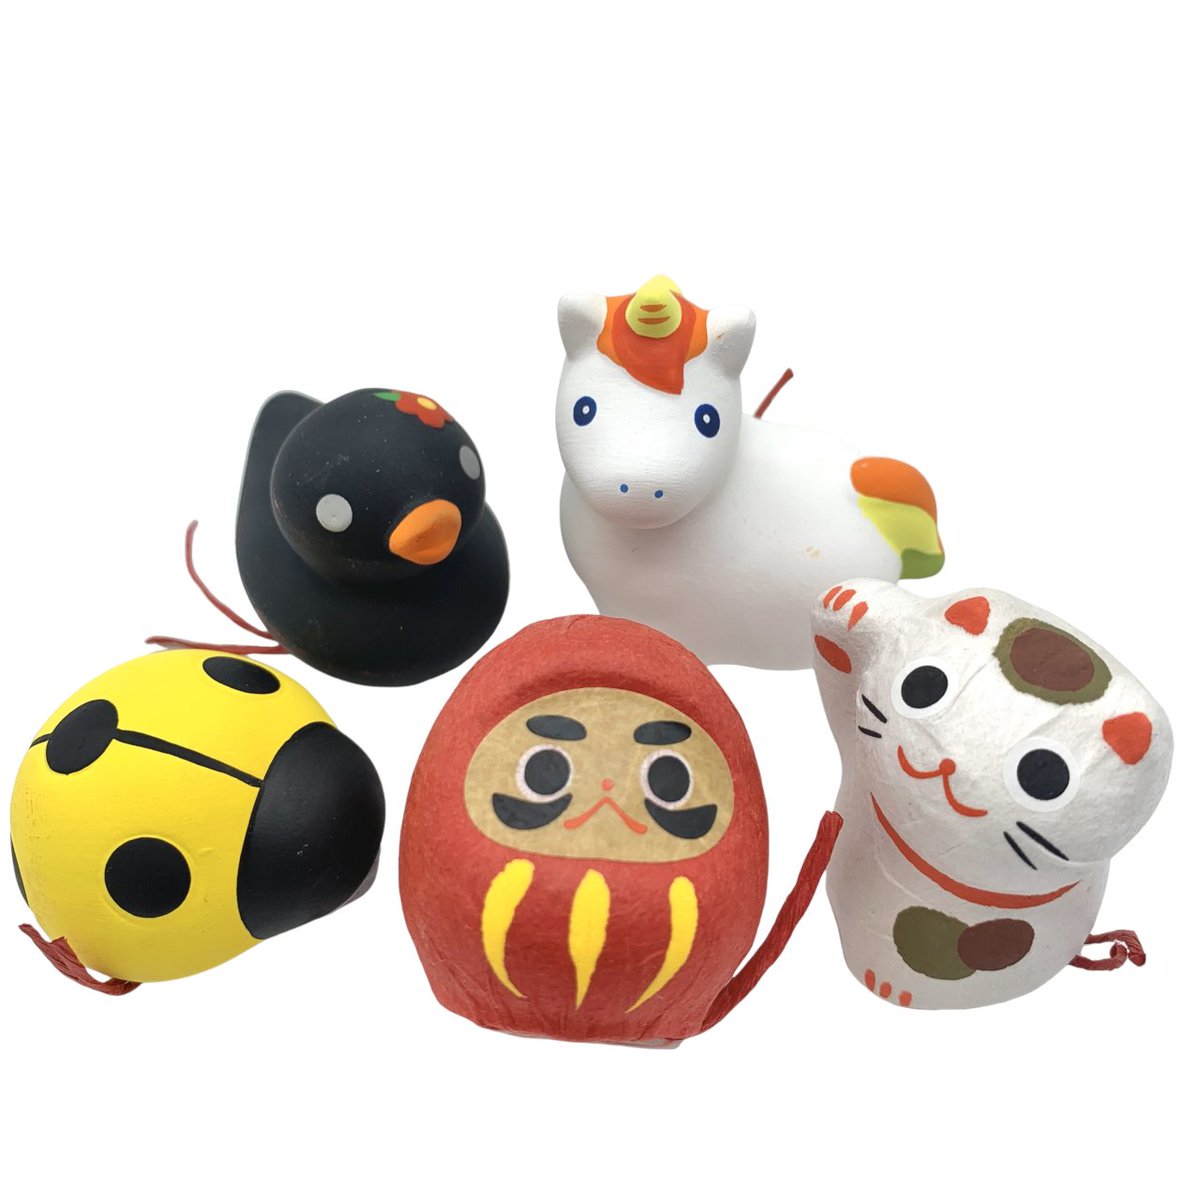 BACK IN STOCK｜-FLOWERRING FORTUNE- Ultimate Your Wishes with Flowering Fortune! Unveil a world of enchantment with our adorable eco-friendly paper clay figurines. Choose from cats, daruma, ladybirds, ducks, or unicorns, each harbouring a secret fortune and random plant seeds.